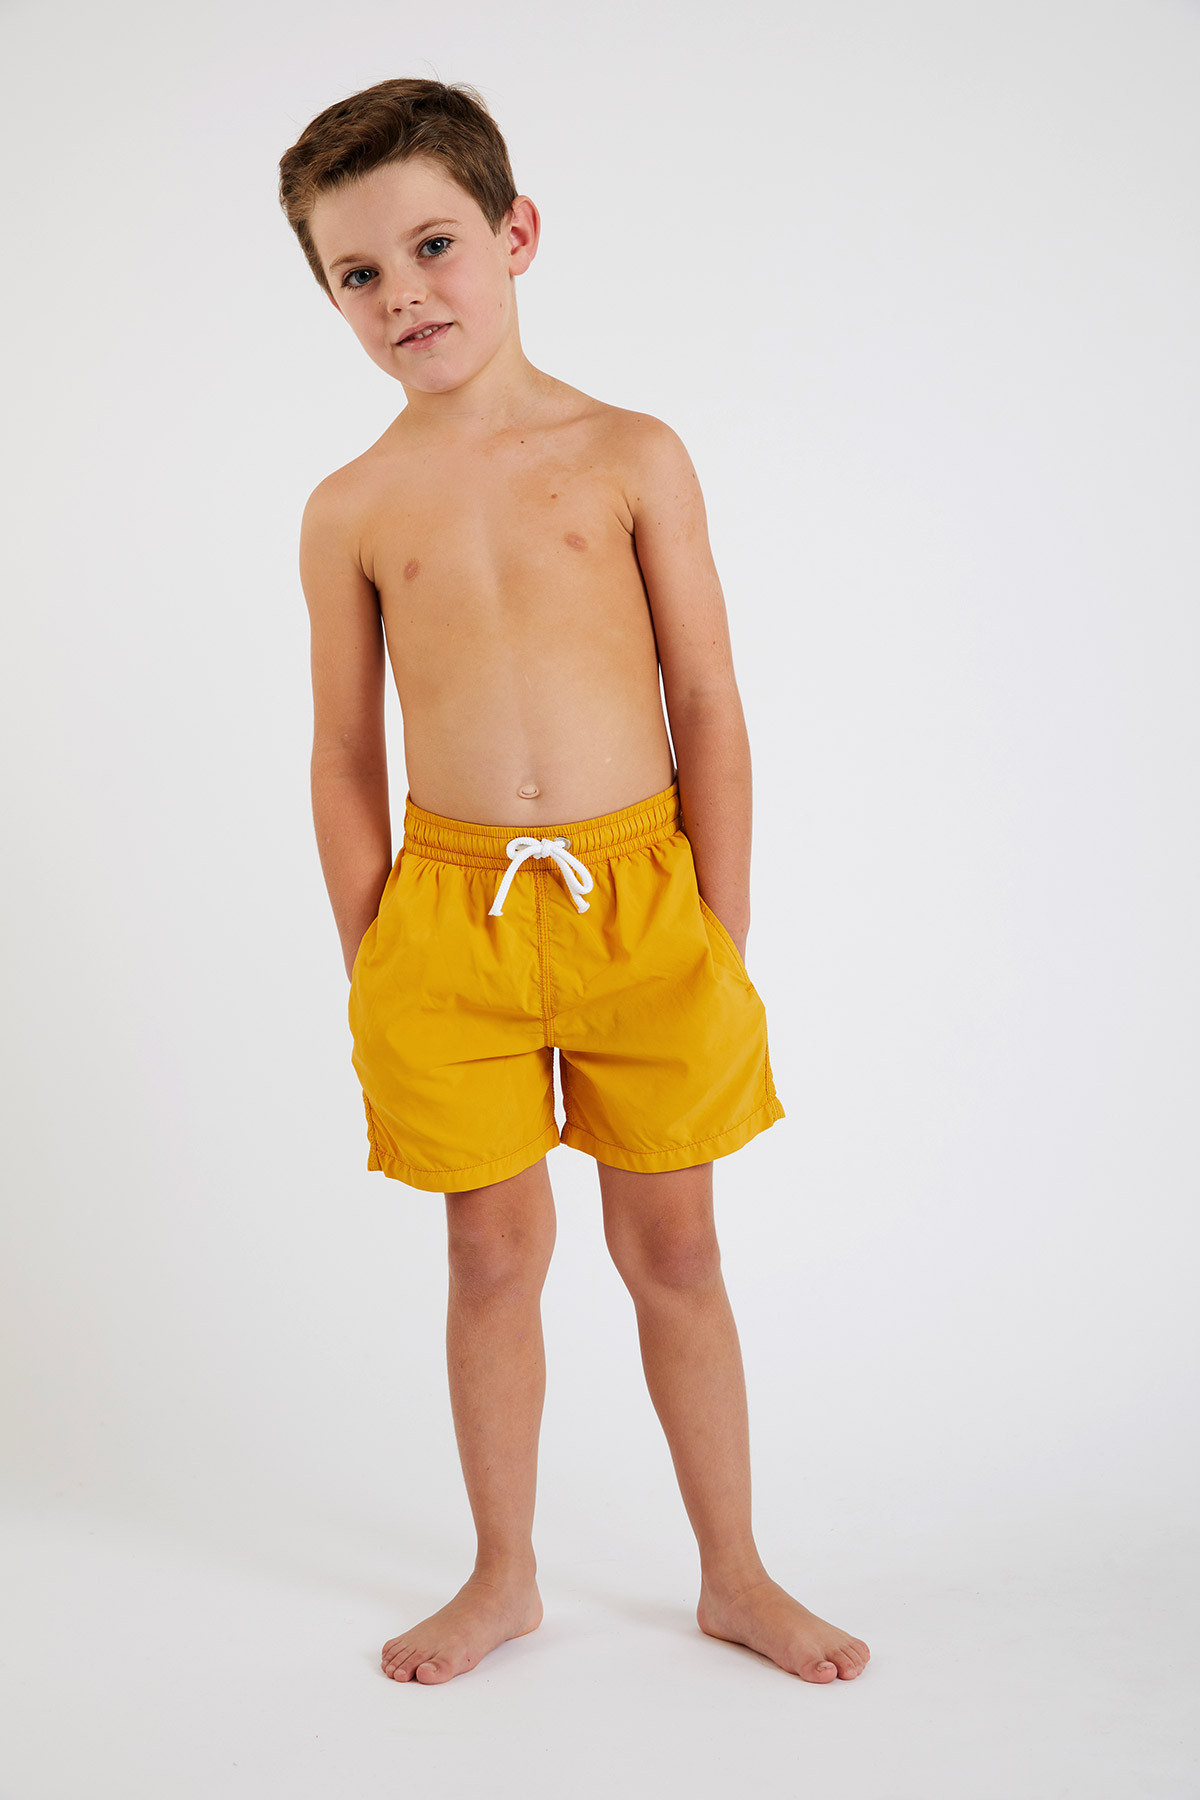 Swoon Boy Swim Shorts - 2359 Watercolor Dino Collection  Let Them Be  Little, A Baby & Children's Clothing Boutique